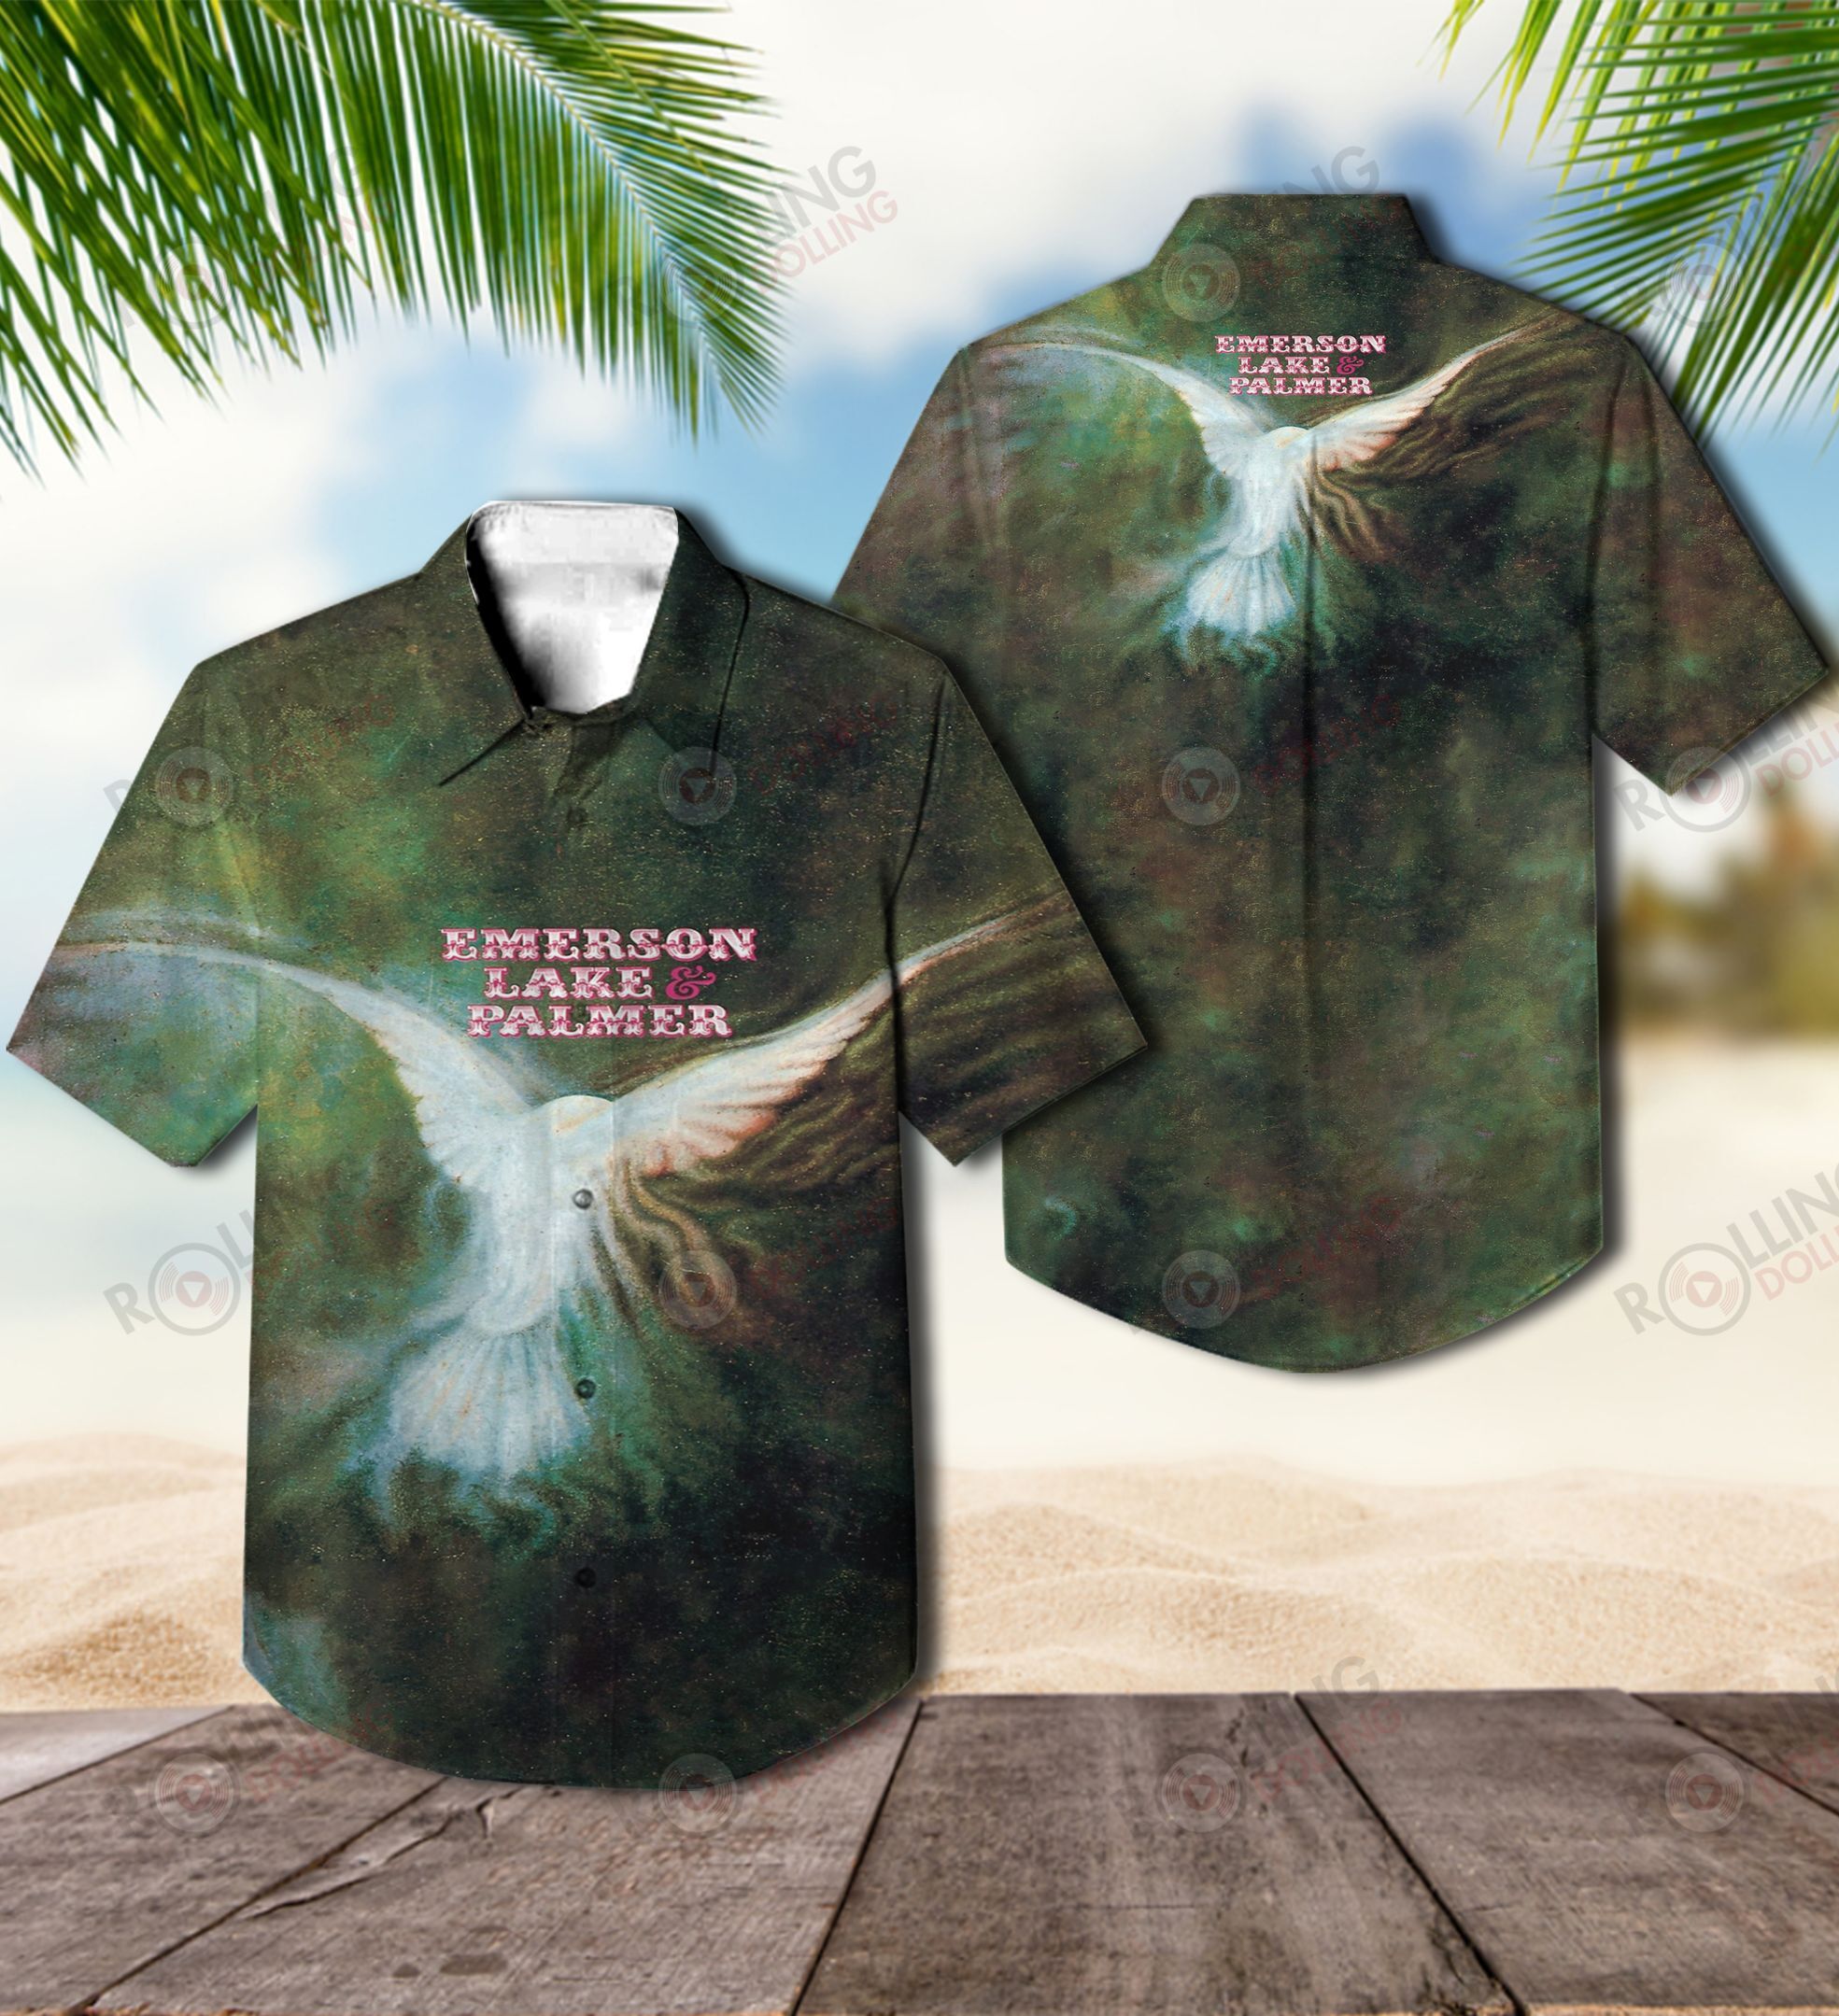 For summer, consider wearing This Amazing Hawaiian Shirt shirt in our store 64